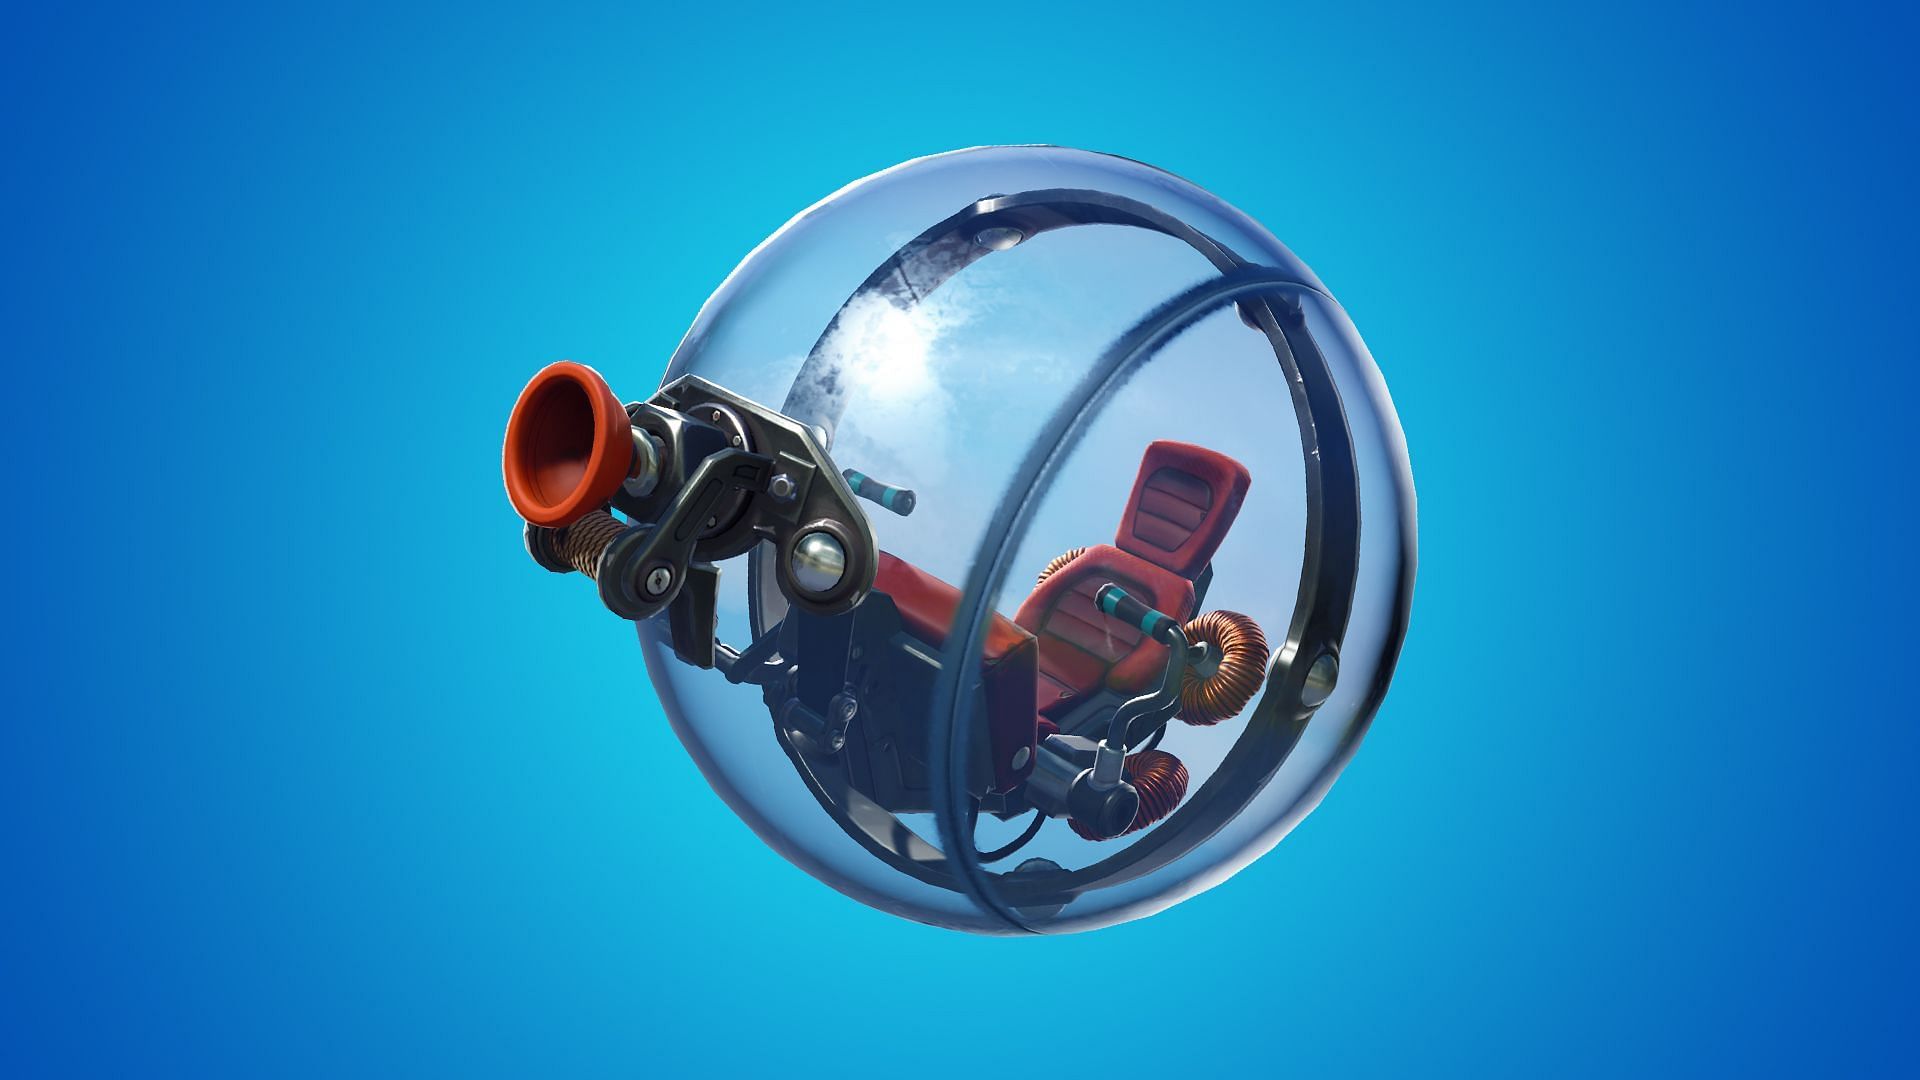 Fortnite players will soon be able to enjoy the island riding in the Baller which has not been seen for quite sometime in the game (Image via Epic Games)